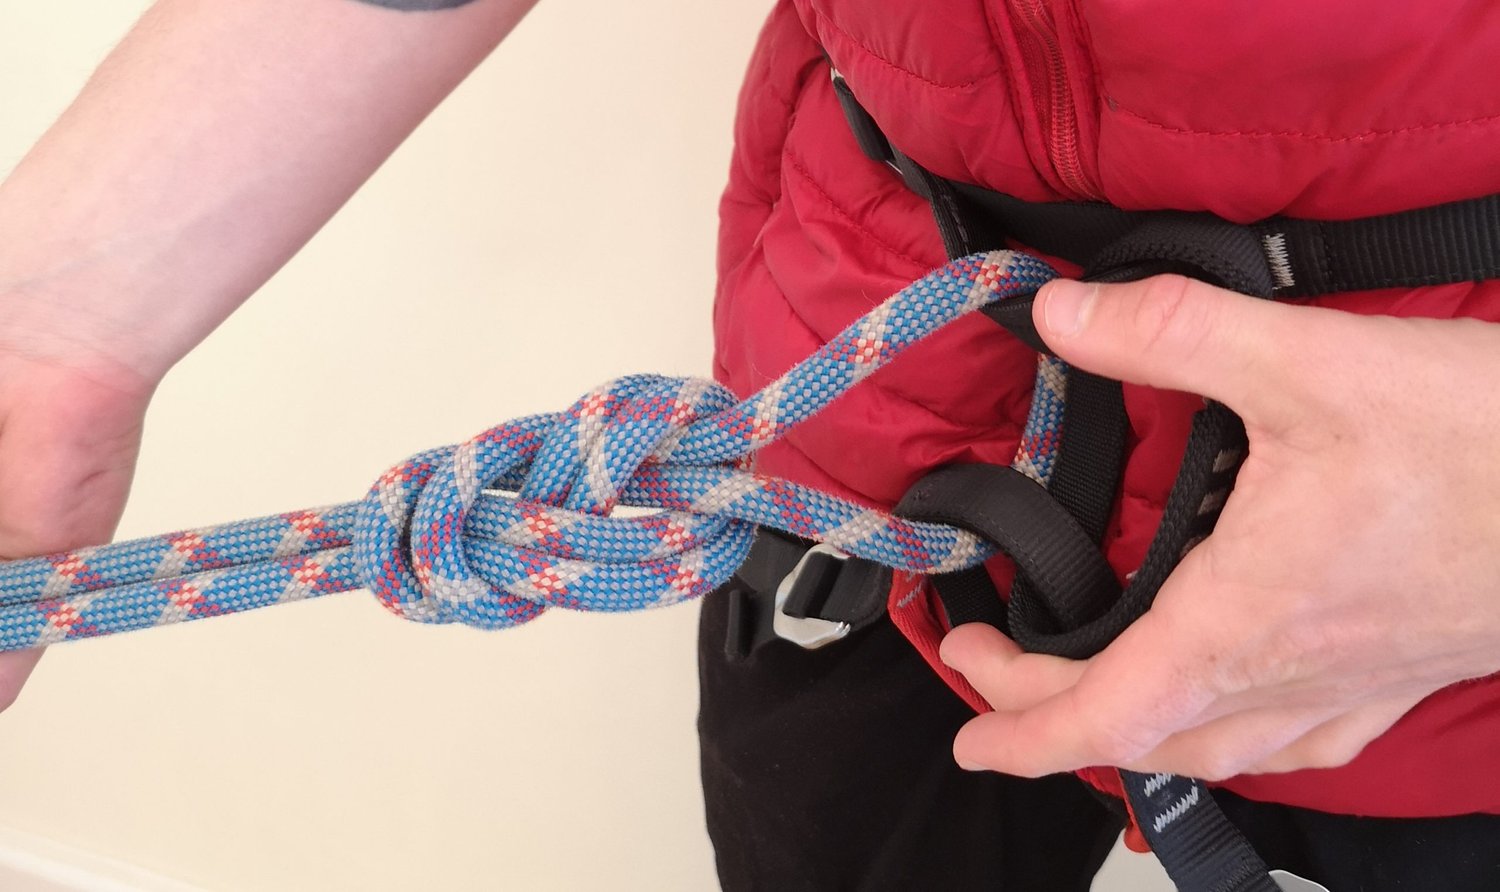 Someone tying a rope onto their rock climbing belay harness